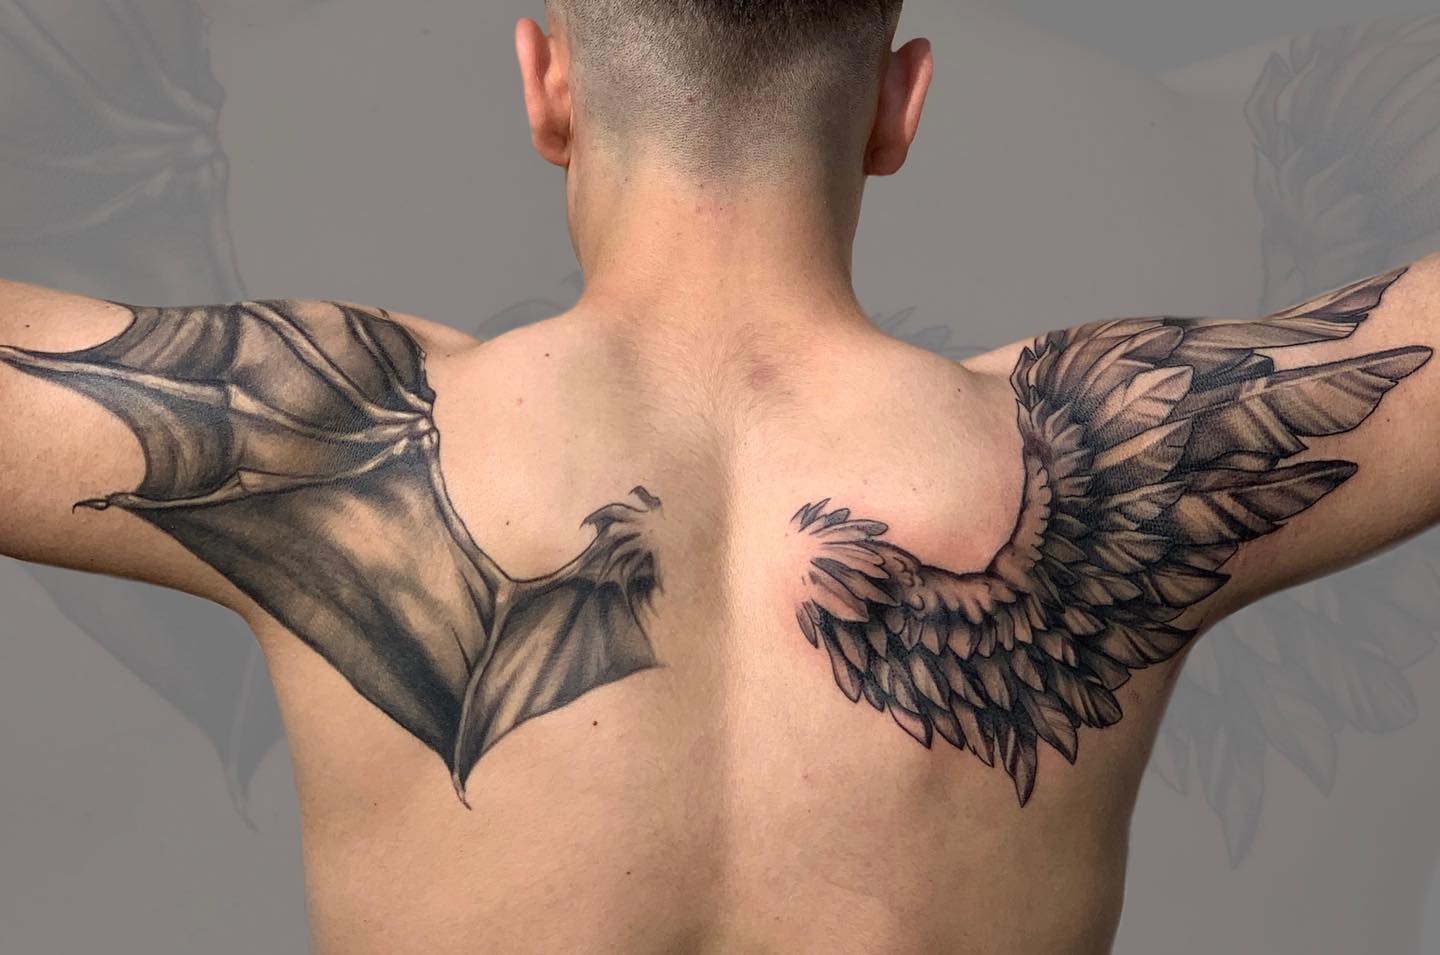 Free handed design of an angel and devil wing tattoo by our artist Joko    Instagram